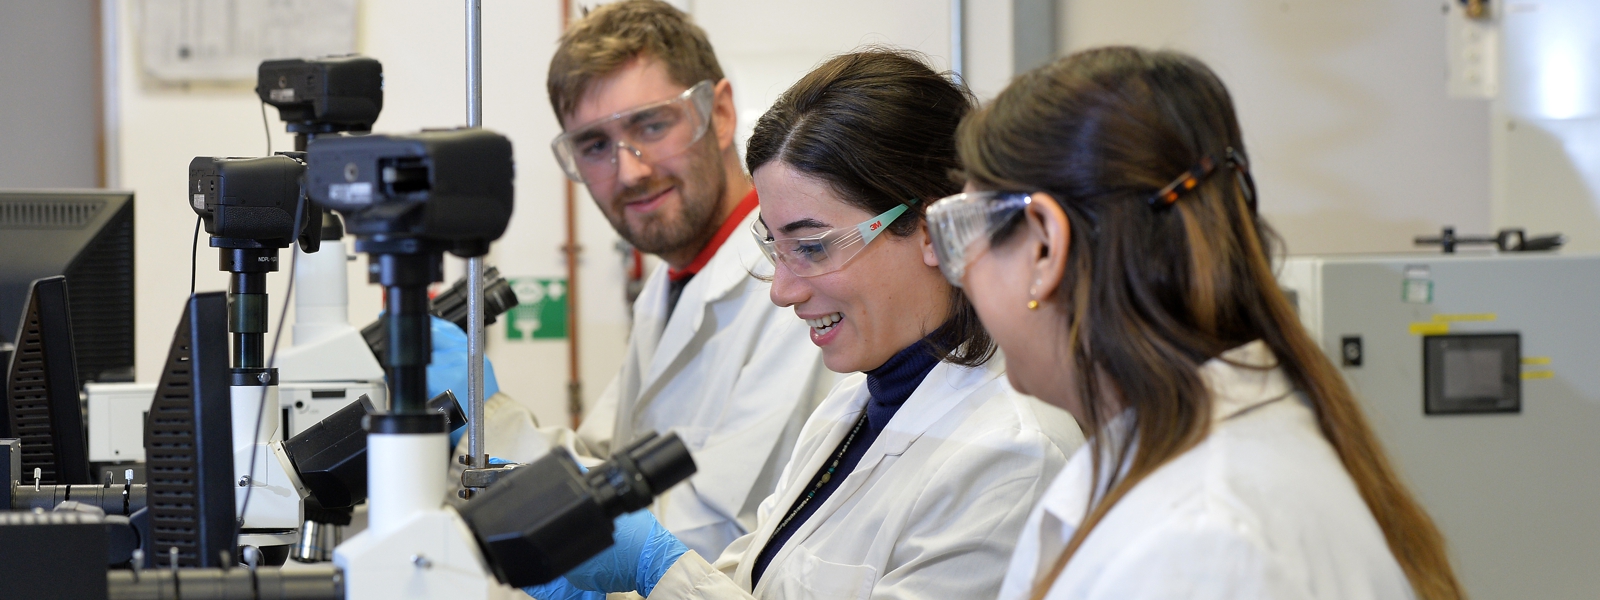 three postgraduate research students smile and work in a lab wearing lab coats